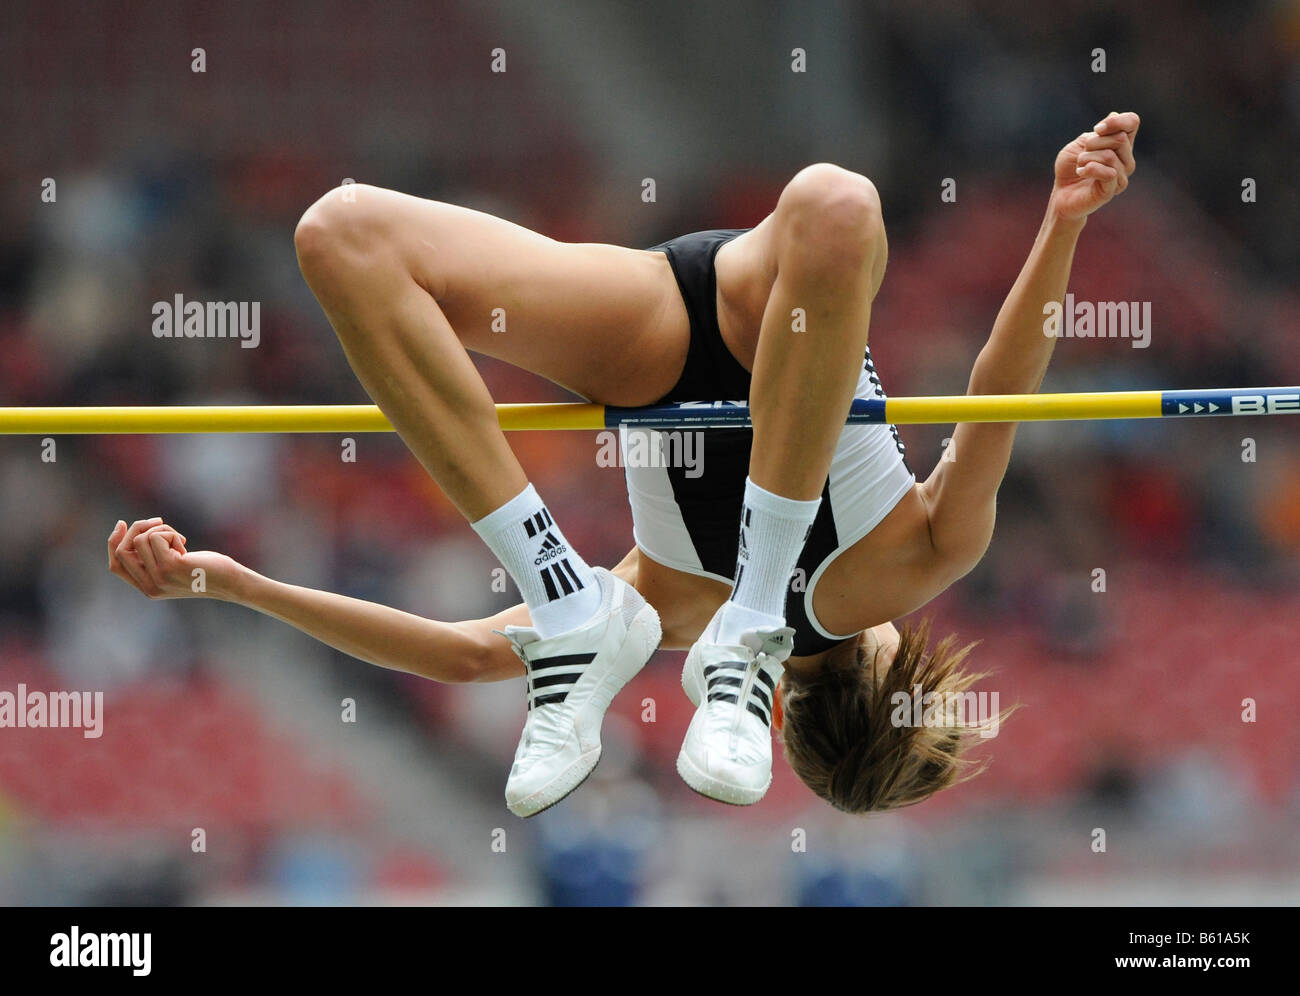 Blanka VLASIC, CRO, High Jump, first place, at the IAAF 2008 World Athletics Final for track and field in the Mercedes-Benz Stock Photo